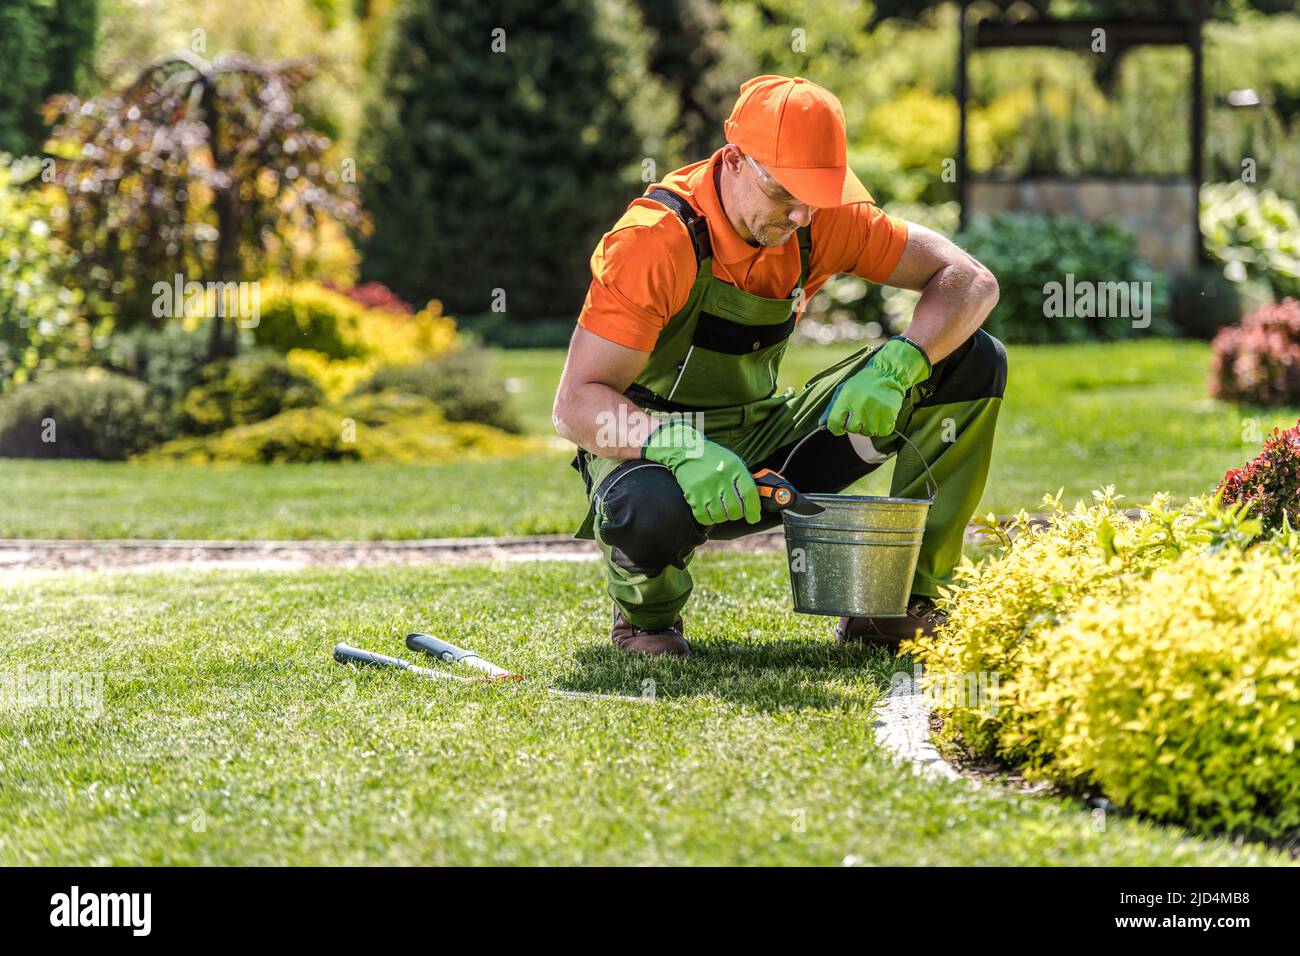 Professional Landscape Gardener Wearing His Gardening Costume Pruning Plants with Secateurs During Garden Care and Maintenance Work. Gardening Tools i Stock Photo